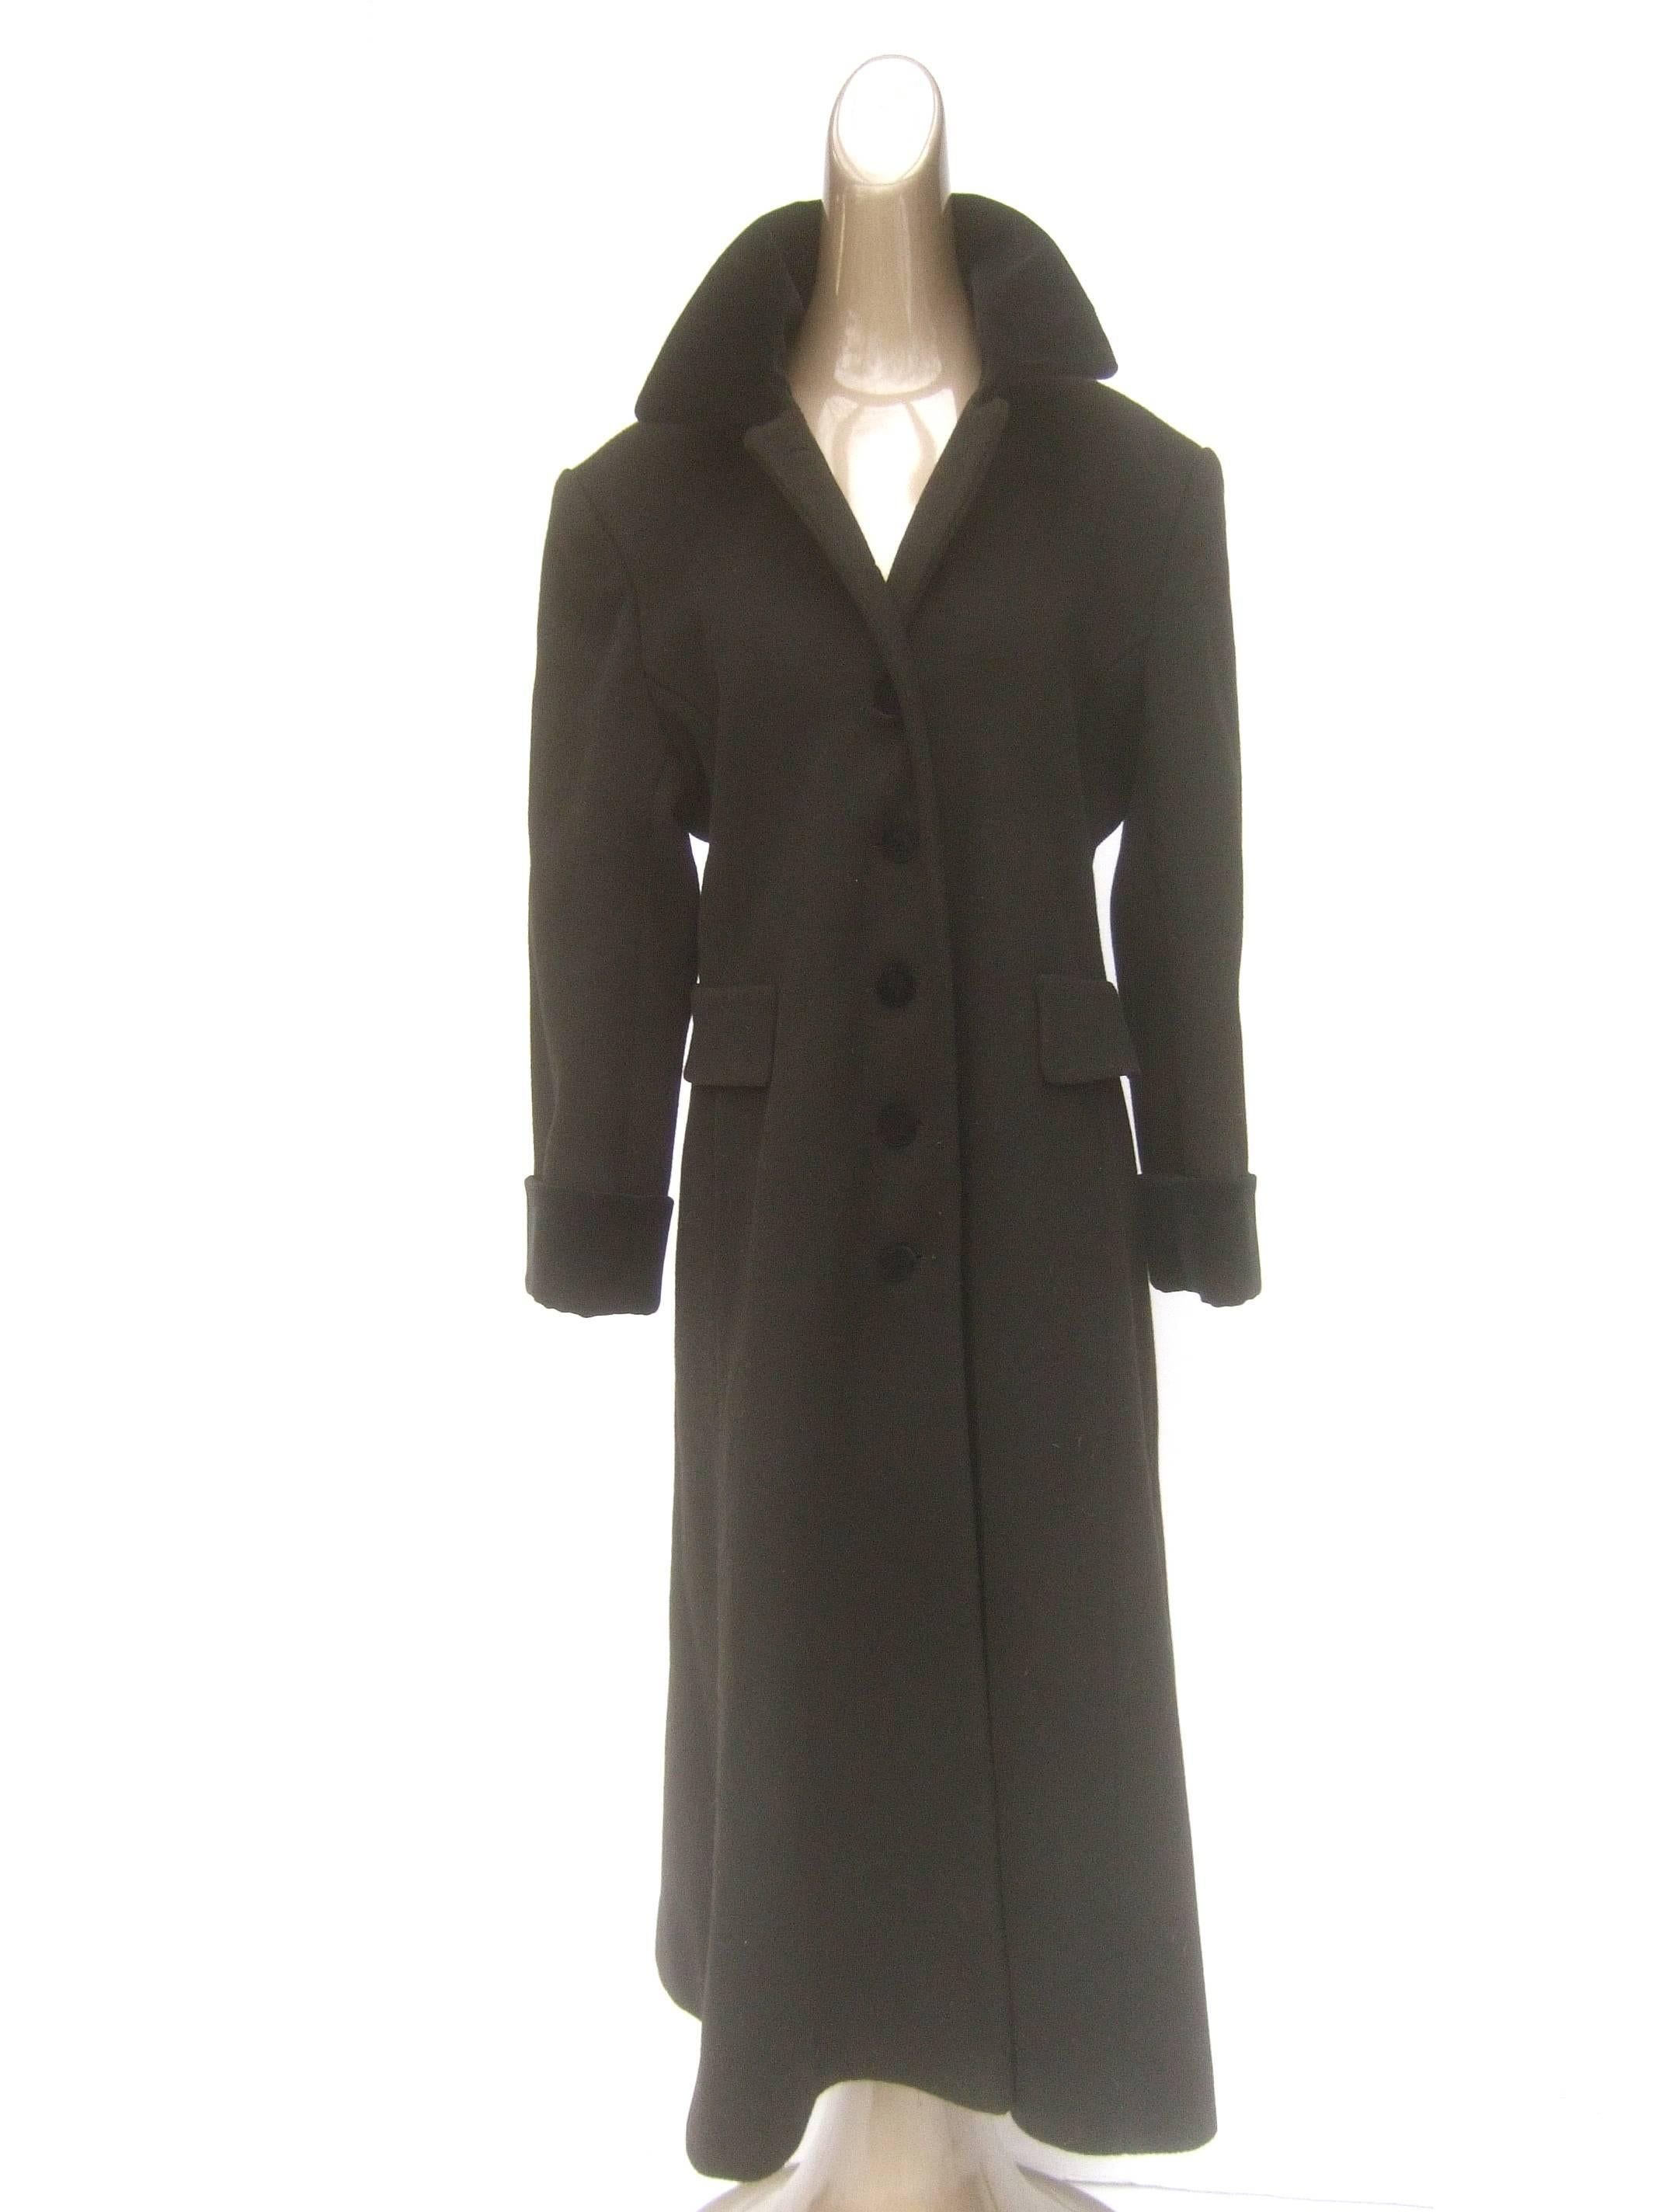 Halston H Black wool velvet trim coat c 1990s 
The classic black wool coat is accented with 
a black velvet collar, cuffs and velvet covered
buttons 

Designed with a pair of faux mock flap covered pockets 
Makes a stylish timeless garment